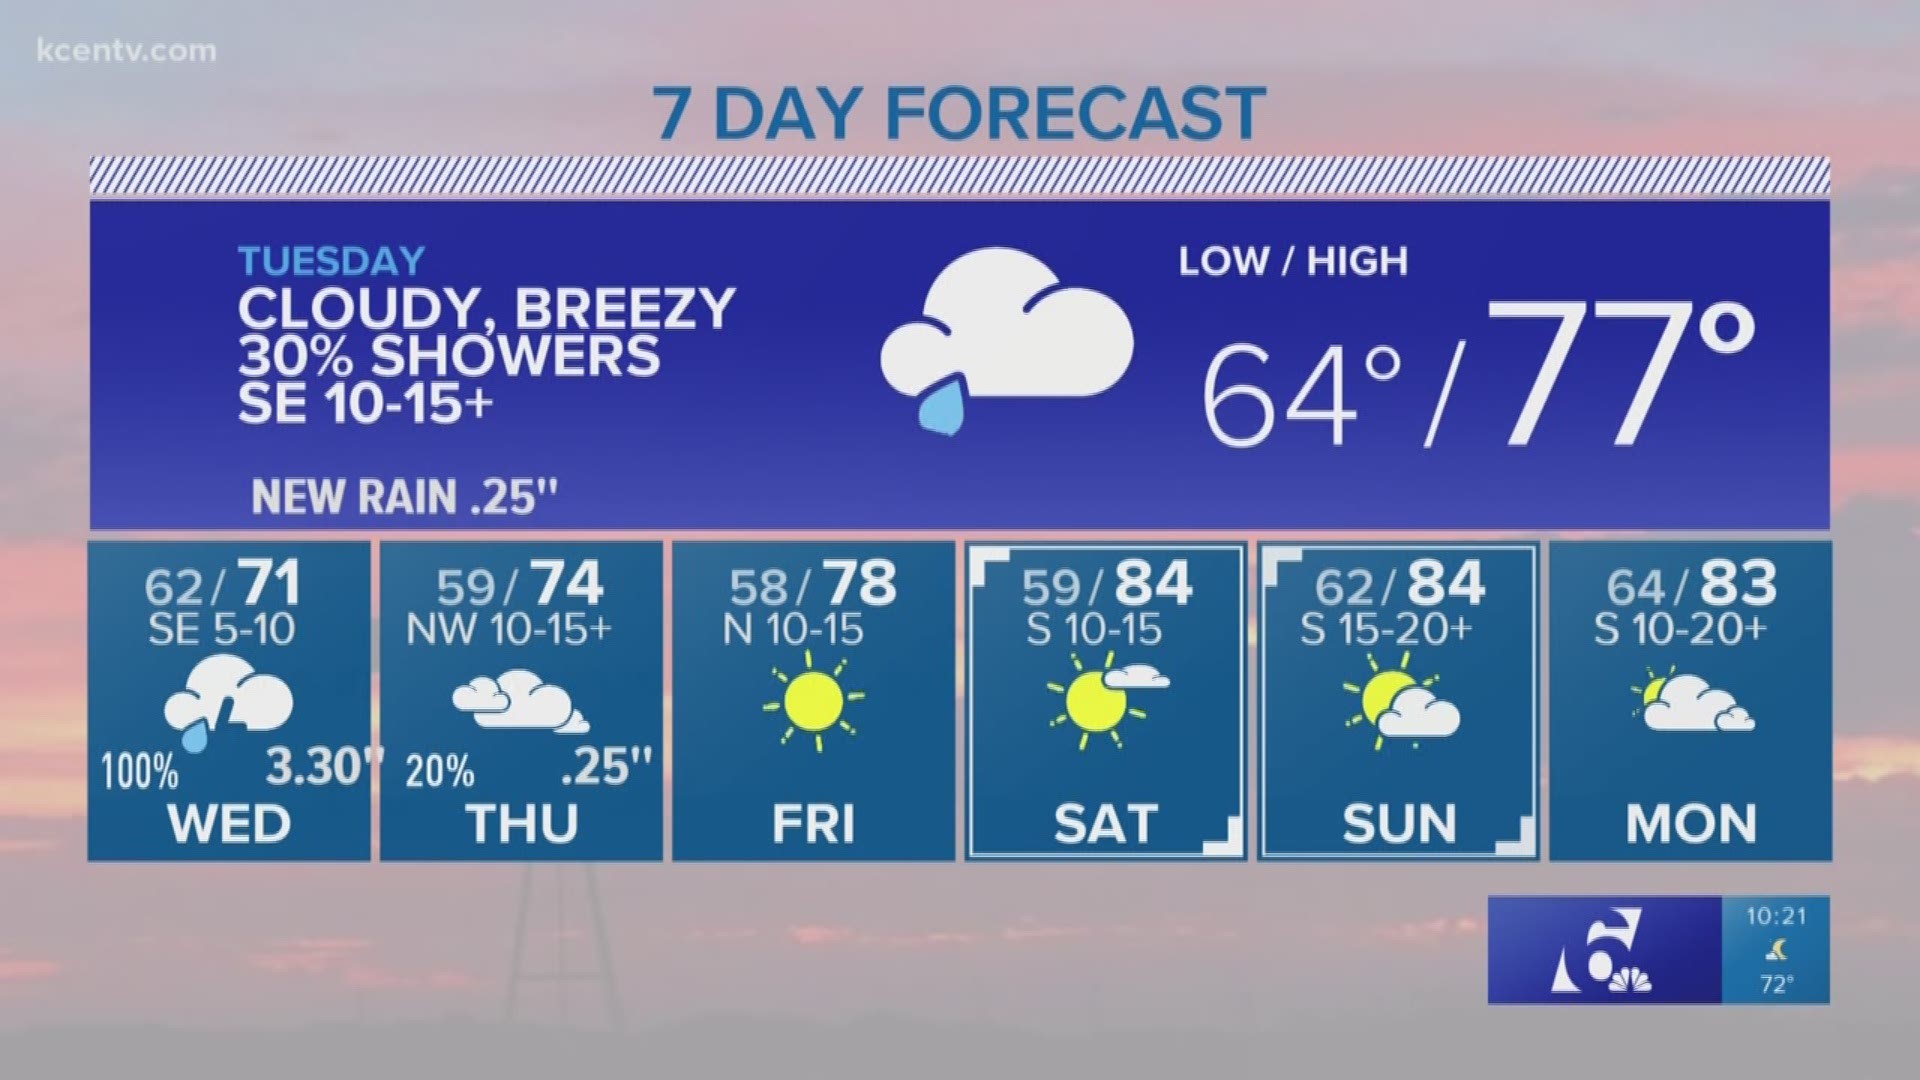 Chief meteorologist Andy Andersen says Tuesday's high is 77 degrees. There's also a 30 percent chance of showers.